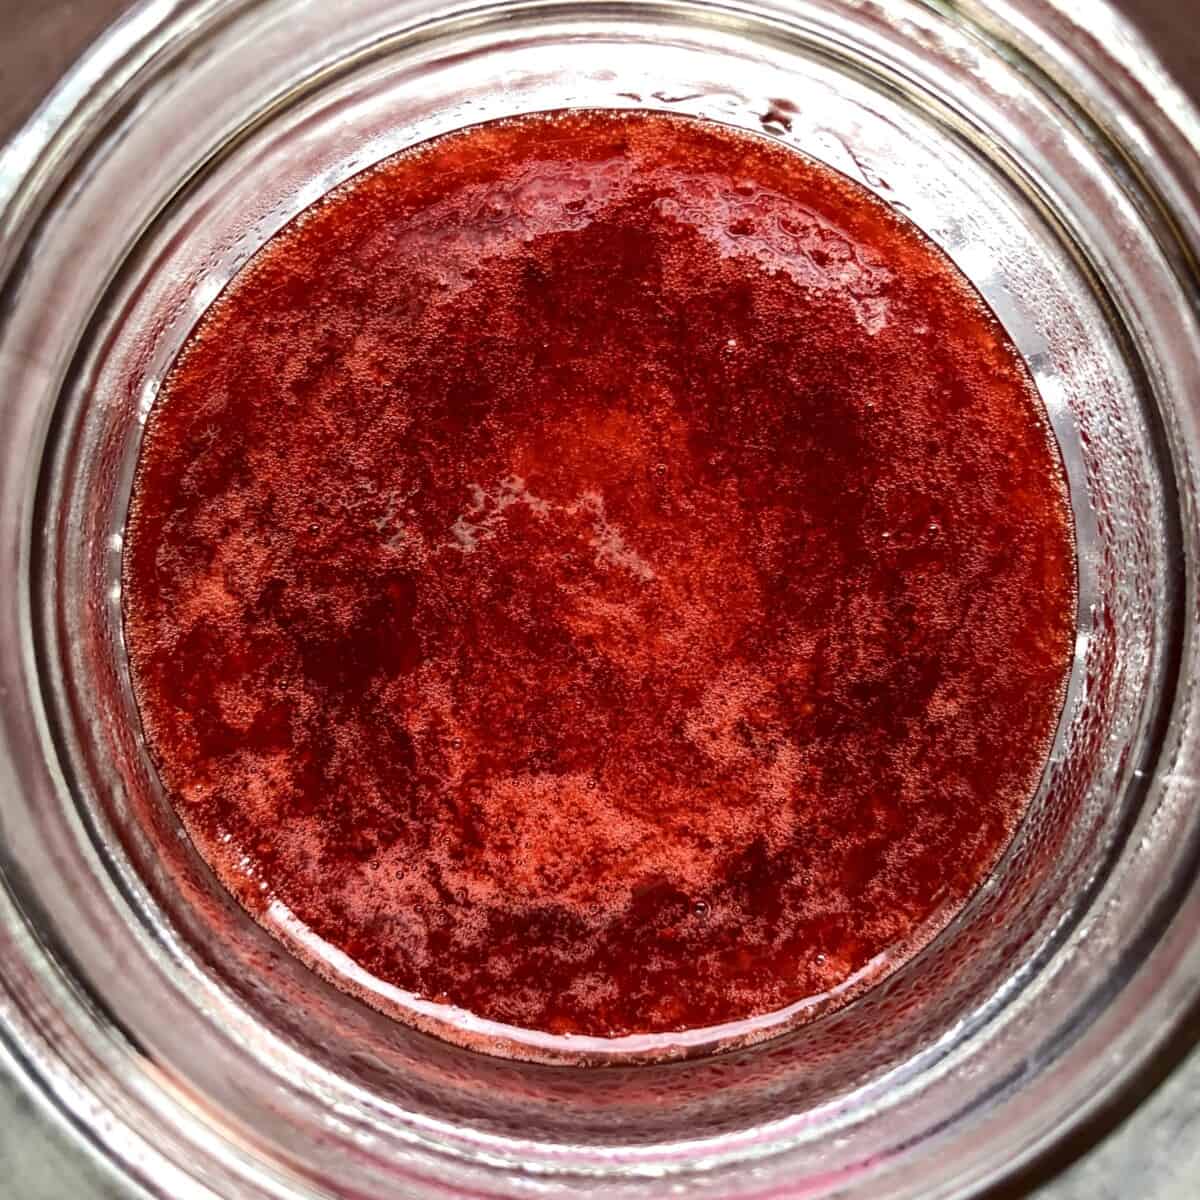 a view down into a widemouth Mason Ball glass canning jar filled with bright deep red homemade strawberry jam